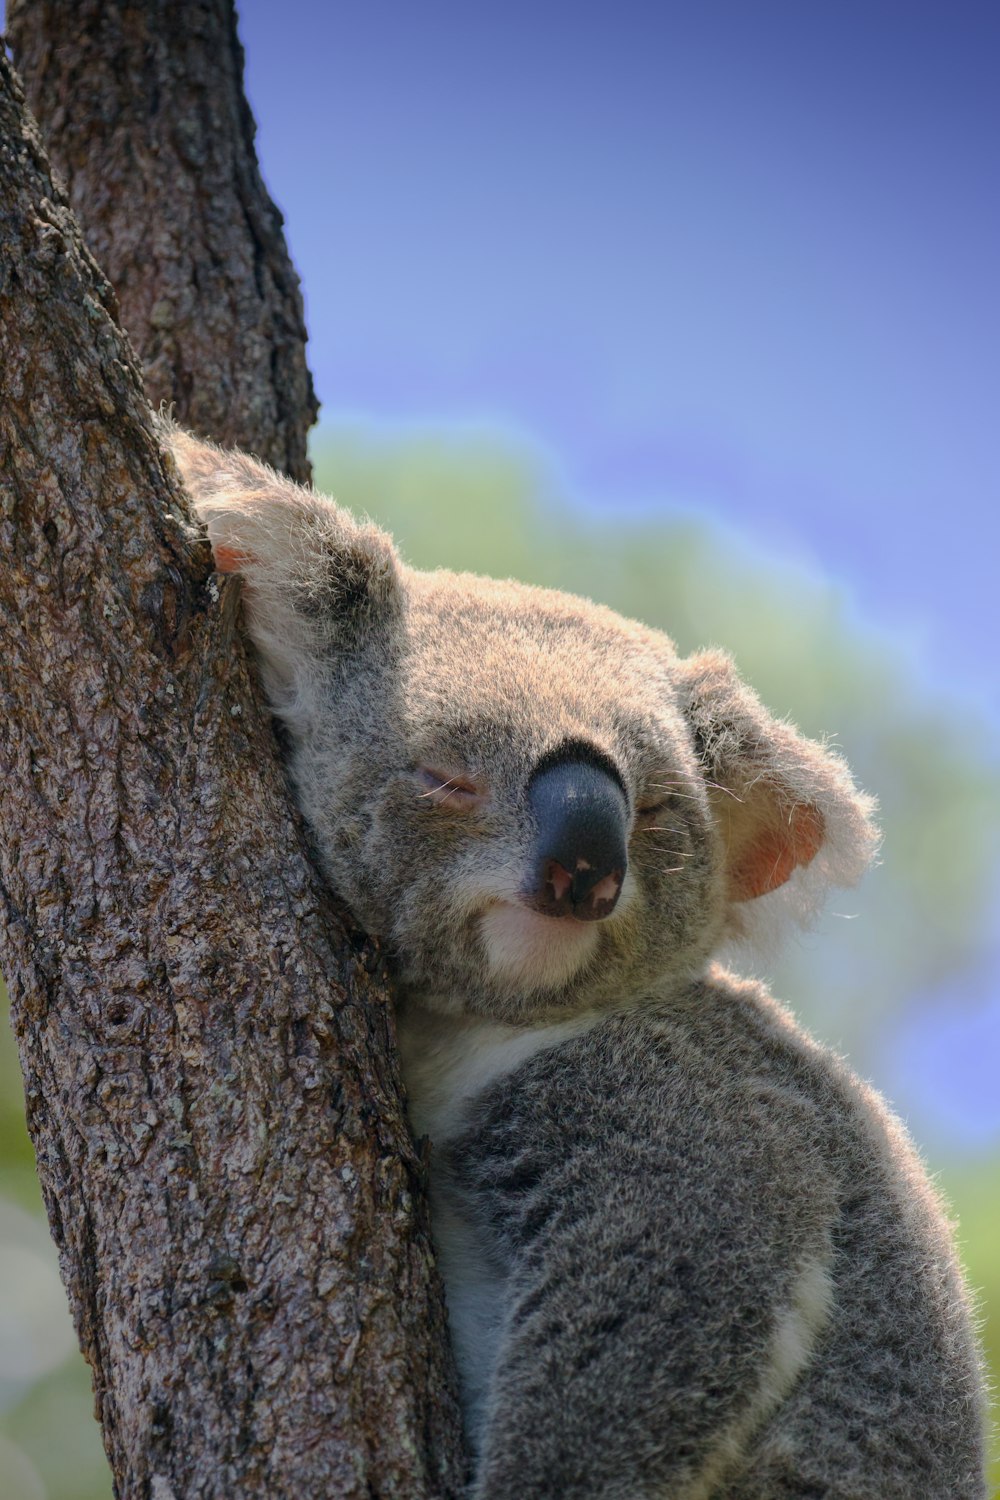 a koala is sitting in a tree with its eyes closed